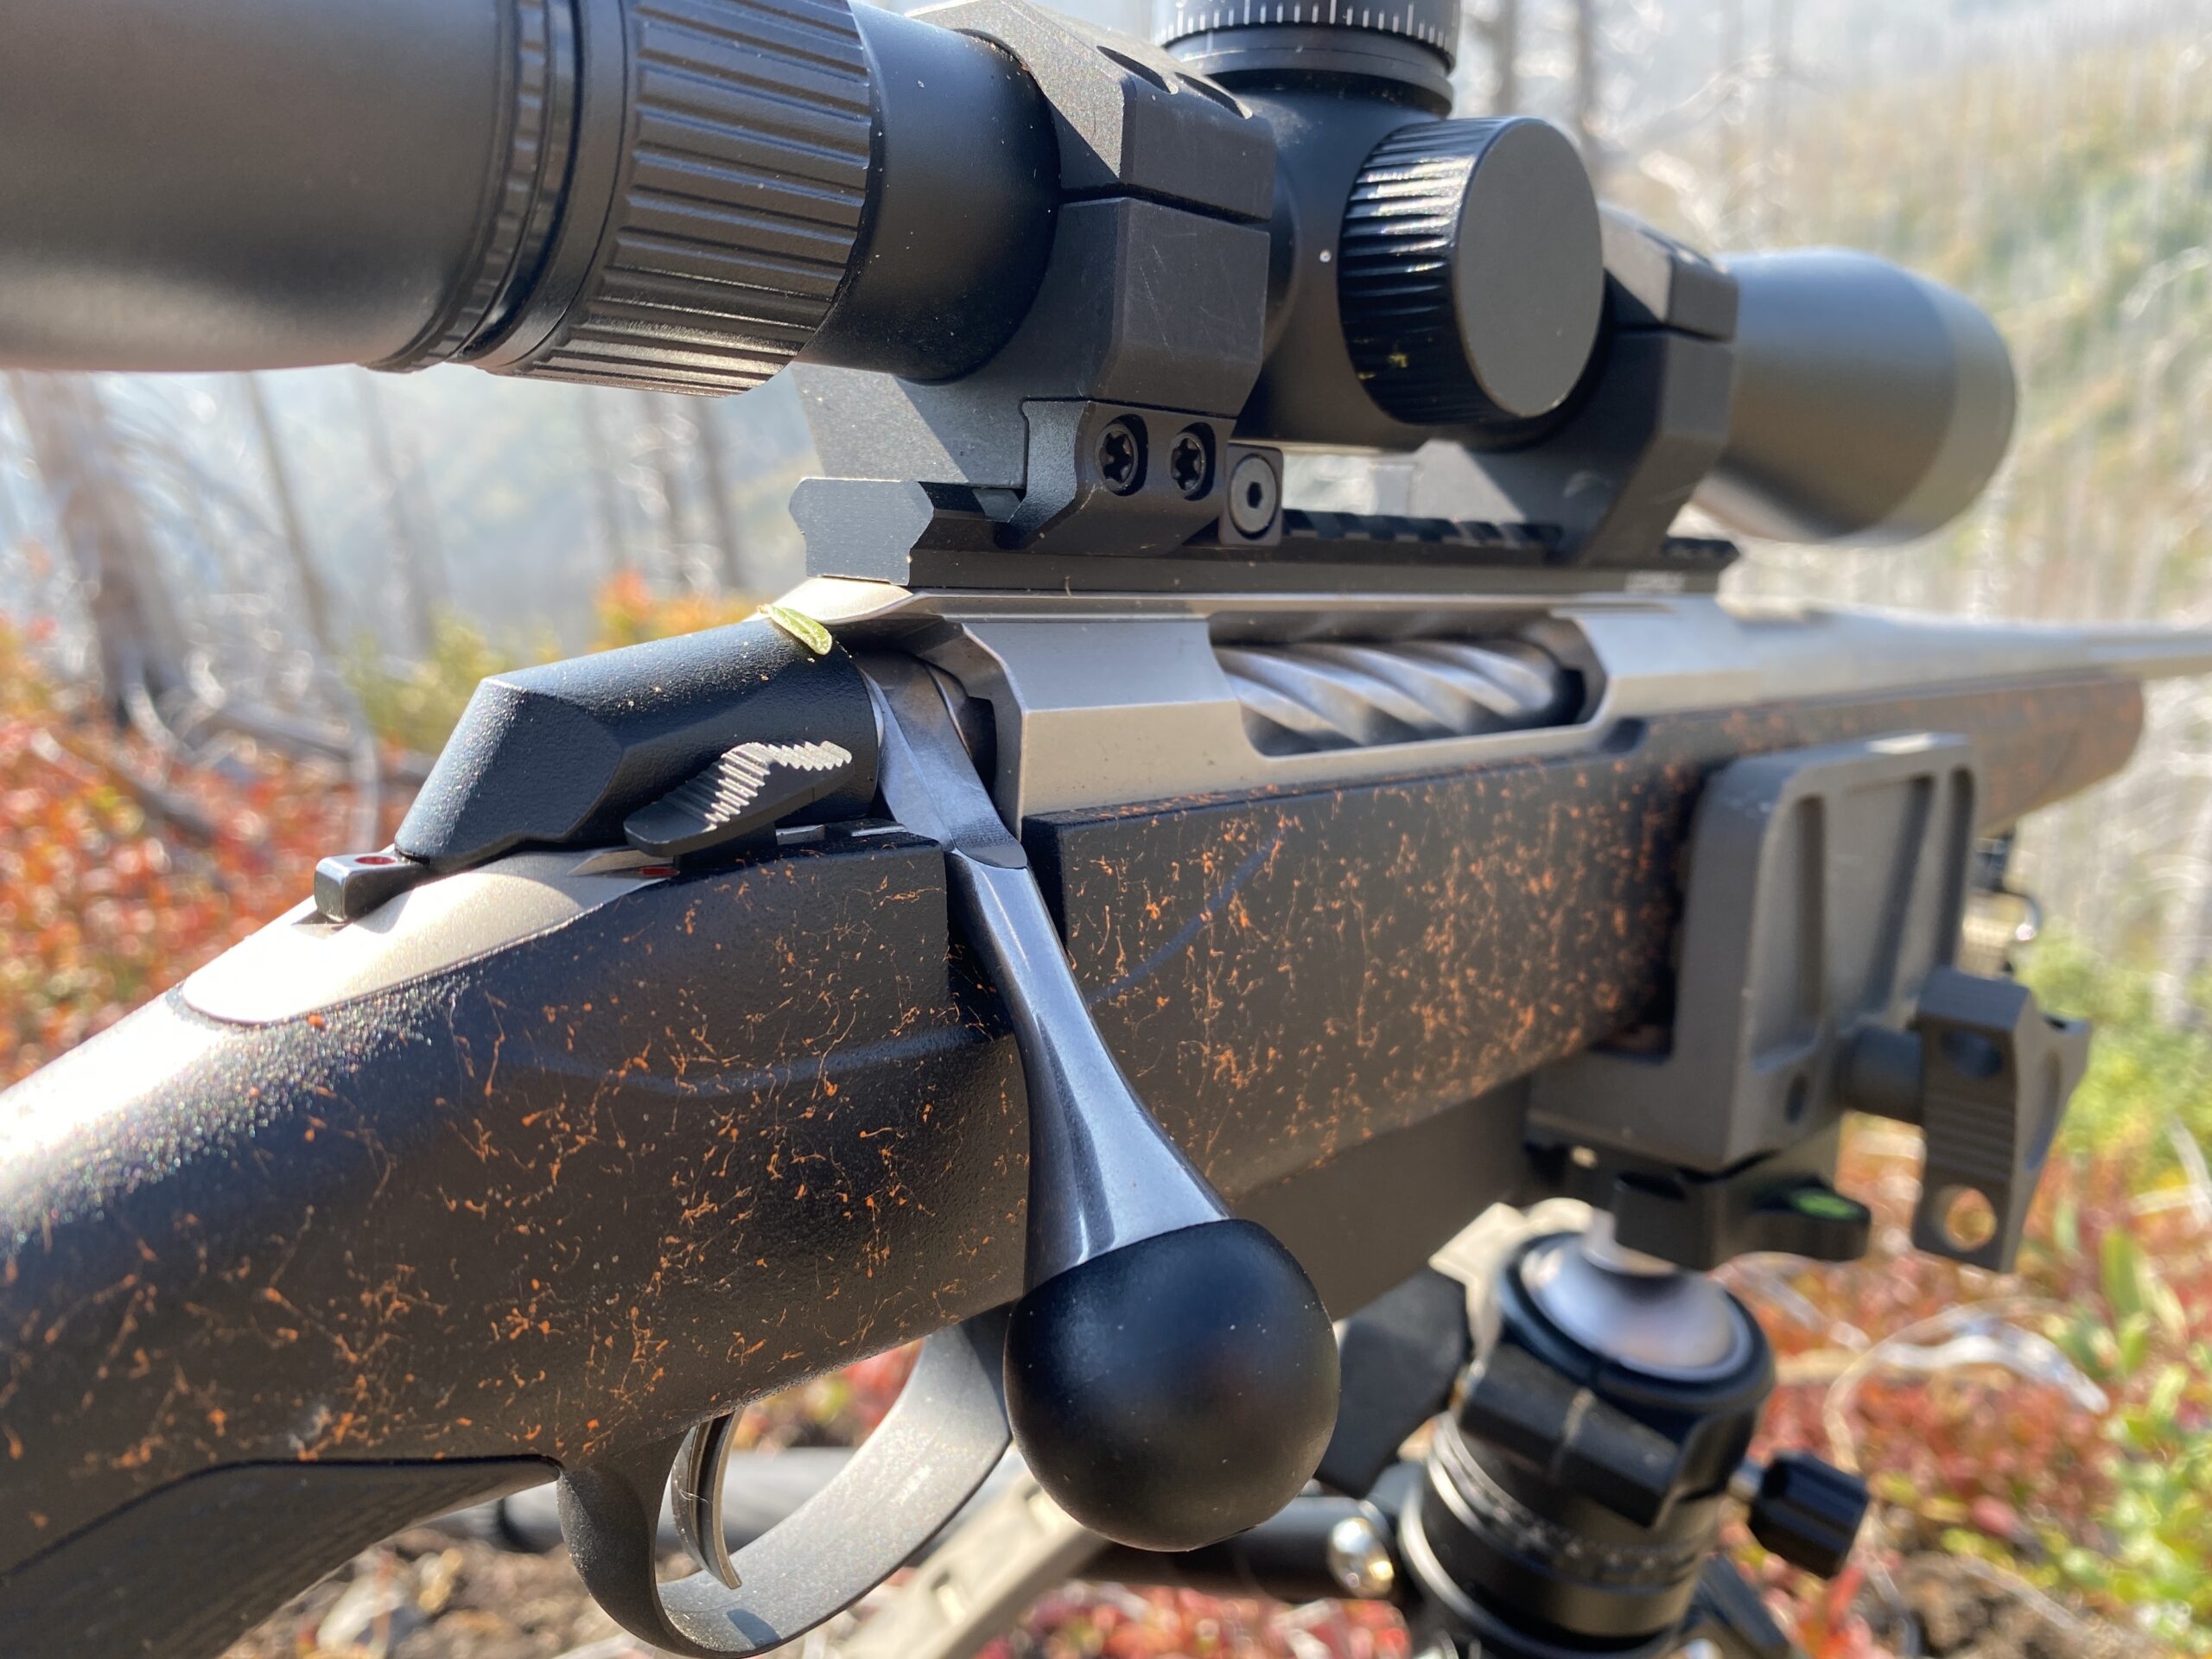 The Tikka T3X Lite Roughtech has a fluted action